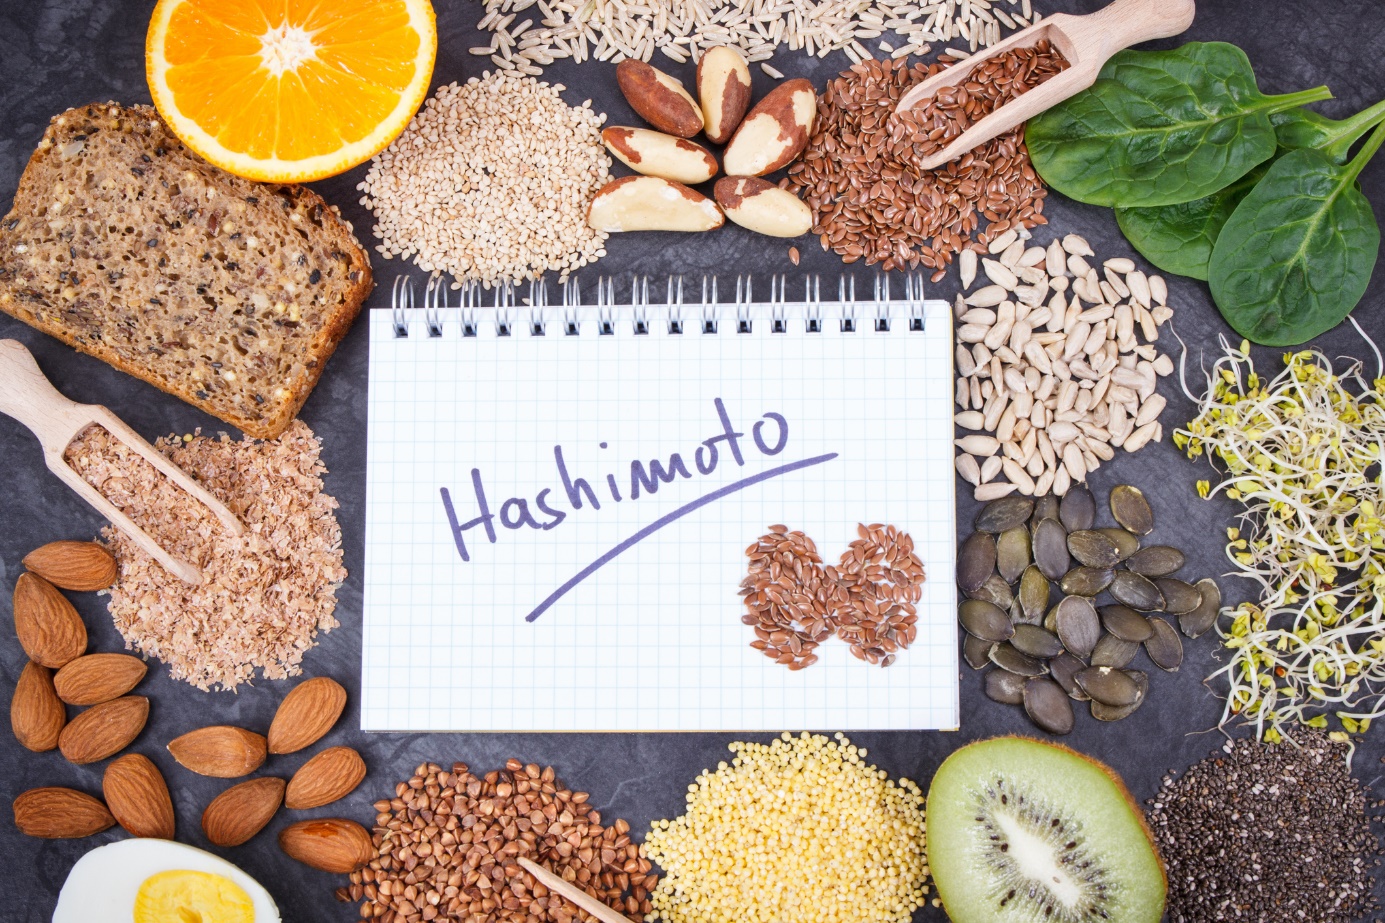 Hashimoto's thyroiditis and appropriate diet